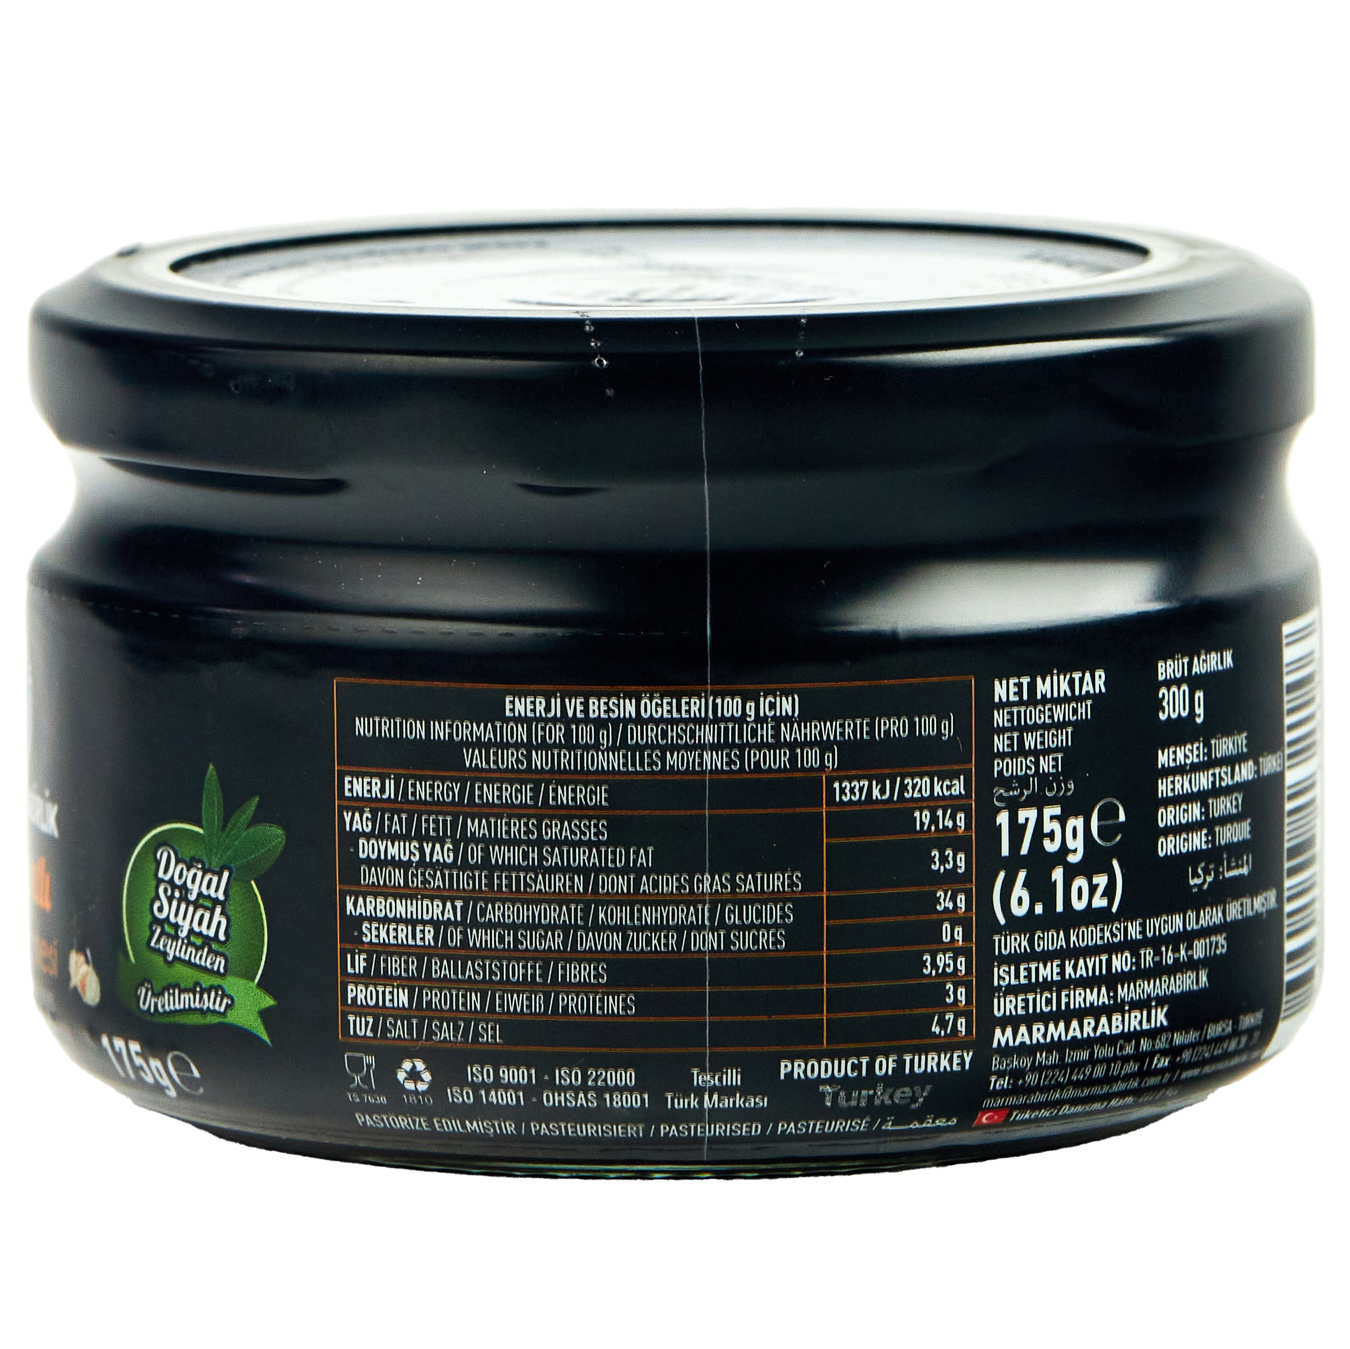 Marmarabirlik Olive Pate with Spices 175g 2